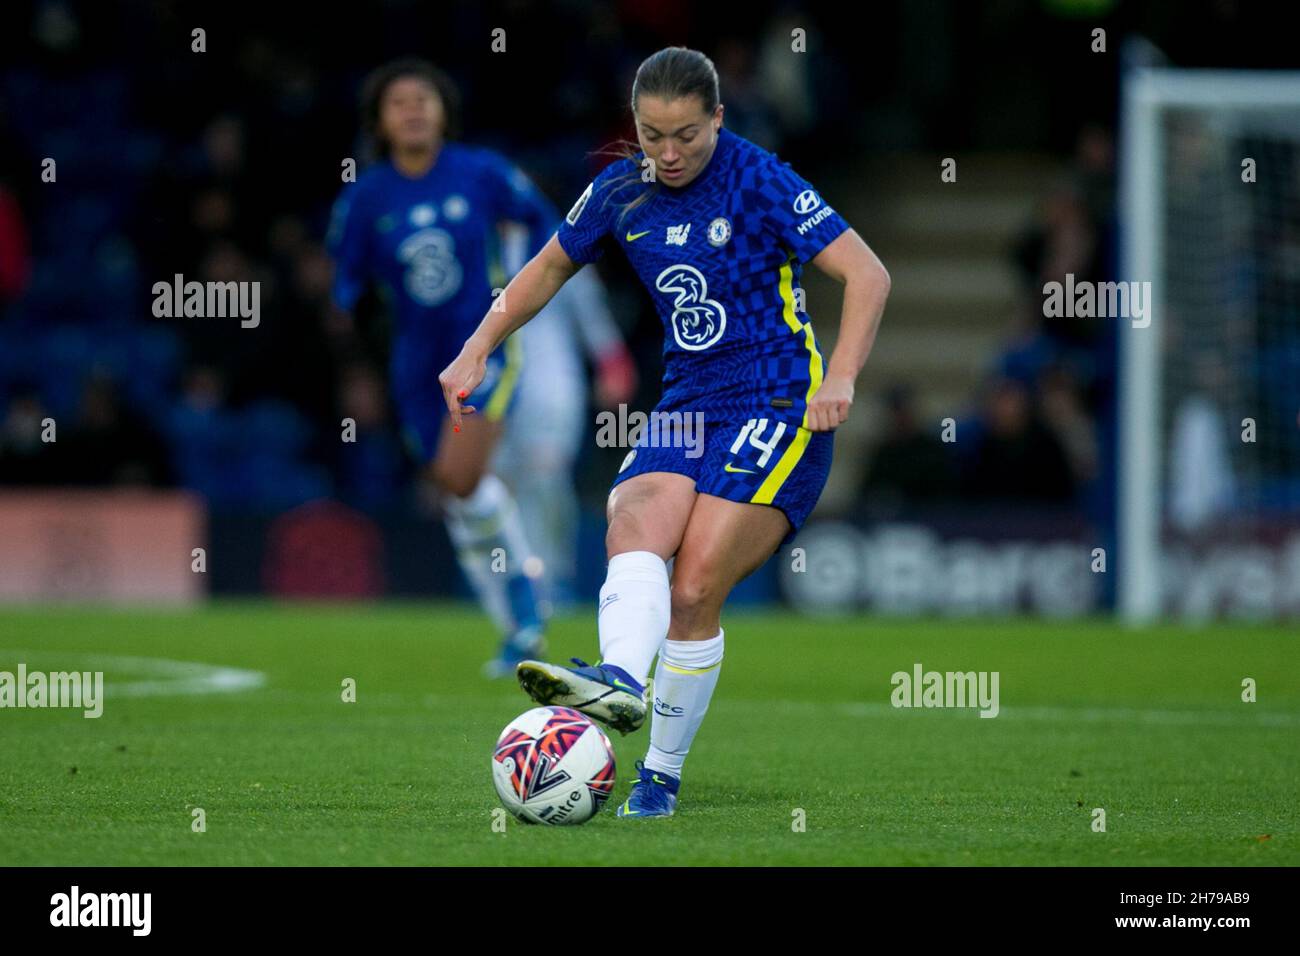 London, UK. 21st Nov, 2021. LONDON, UK. NOVEMBER 21ST : Fran Kirby of Chelsea FC controls the ball during the 2021-22 FA Womens Superleague fixture between Chelsea FC and Birmingham City at Kingsmeadow. Credit: Federico Guerra Morán/Alamy Live News Stock Photo